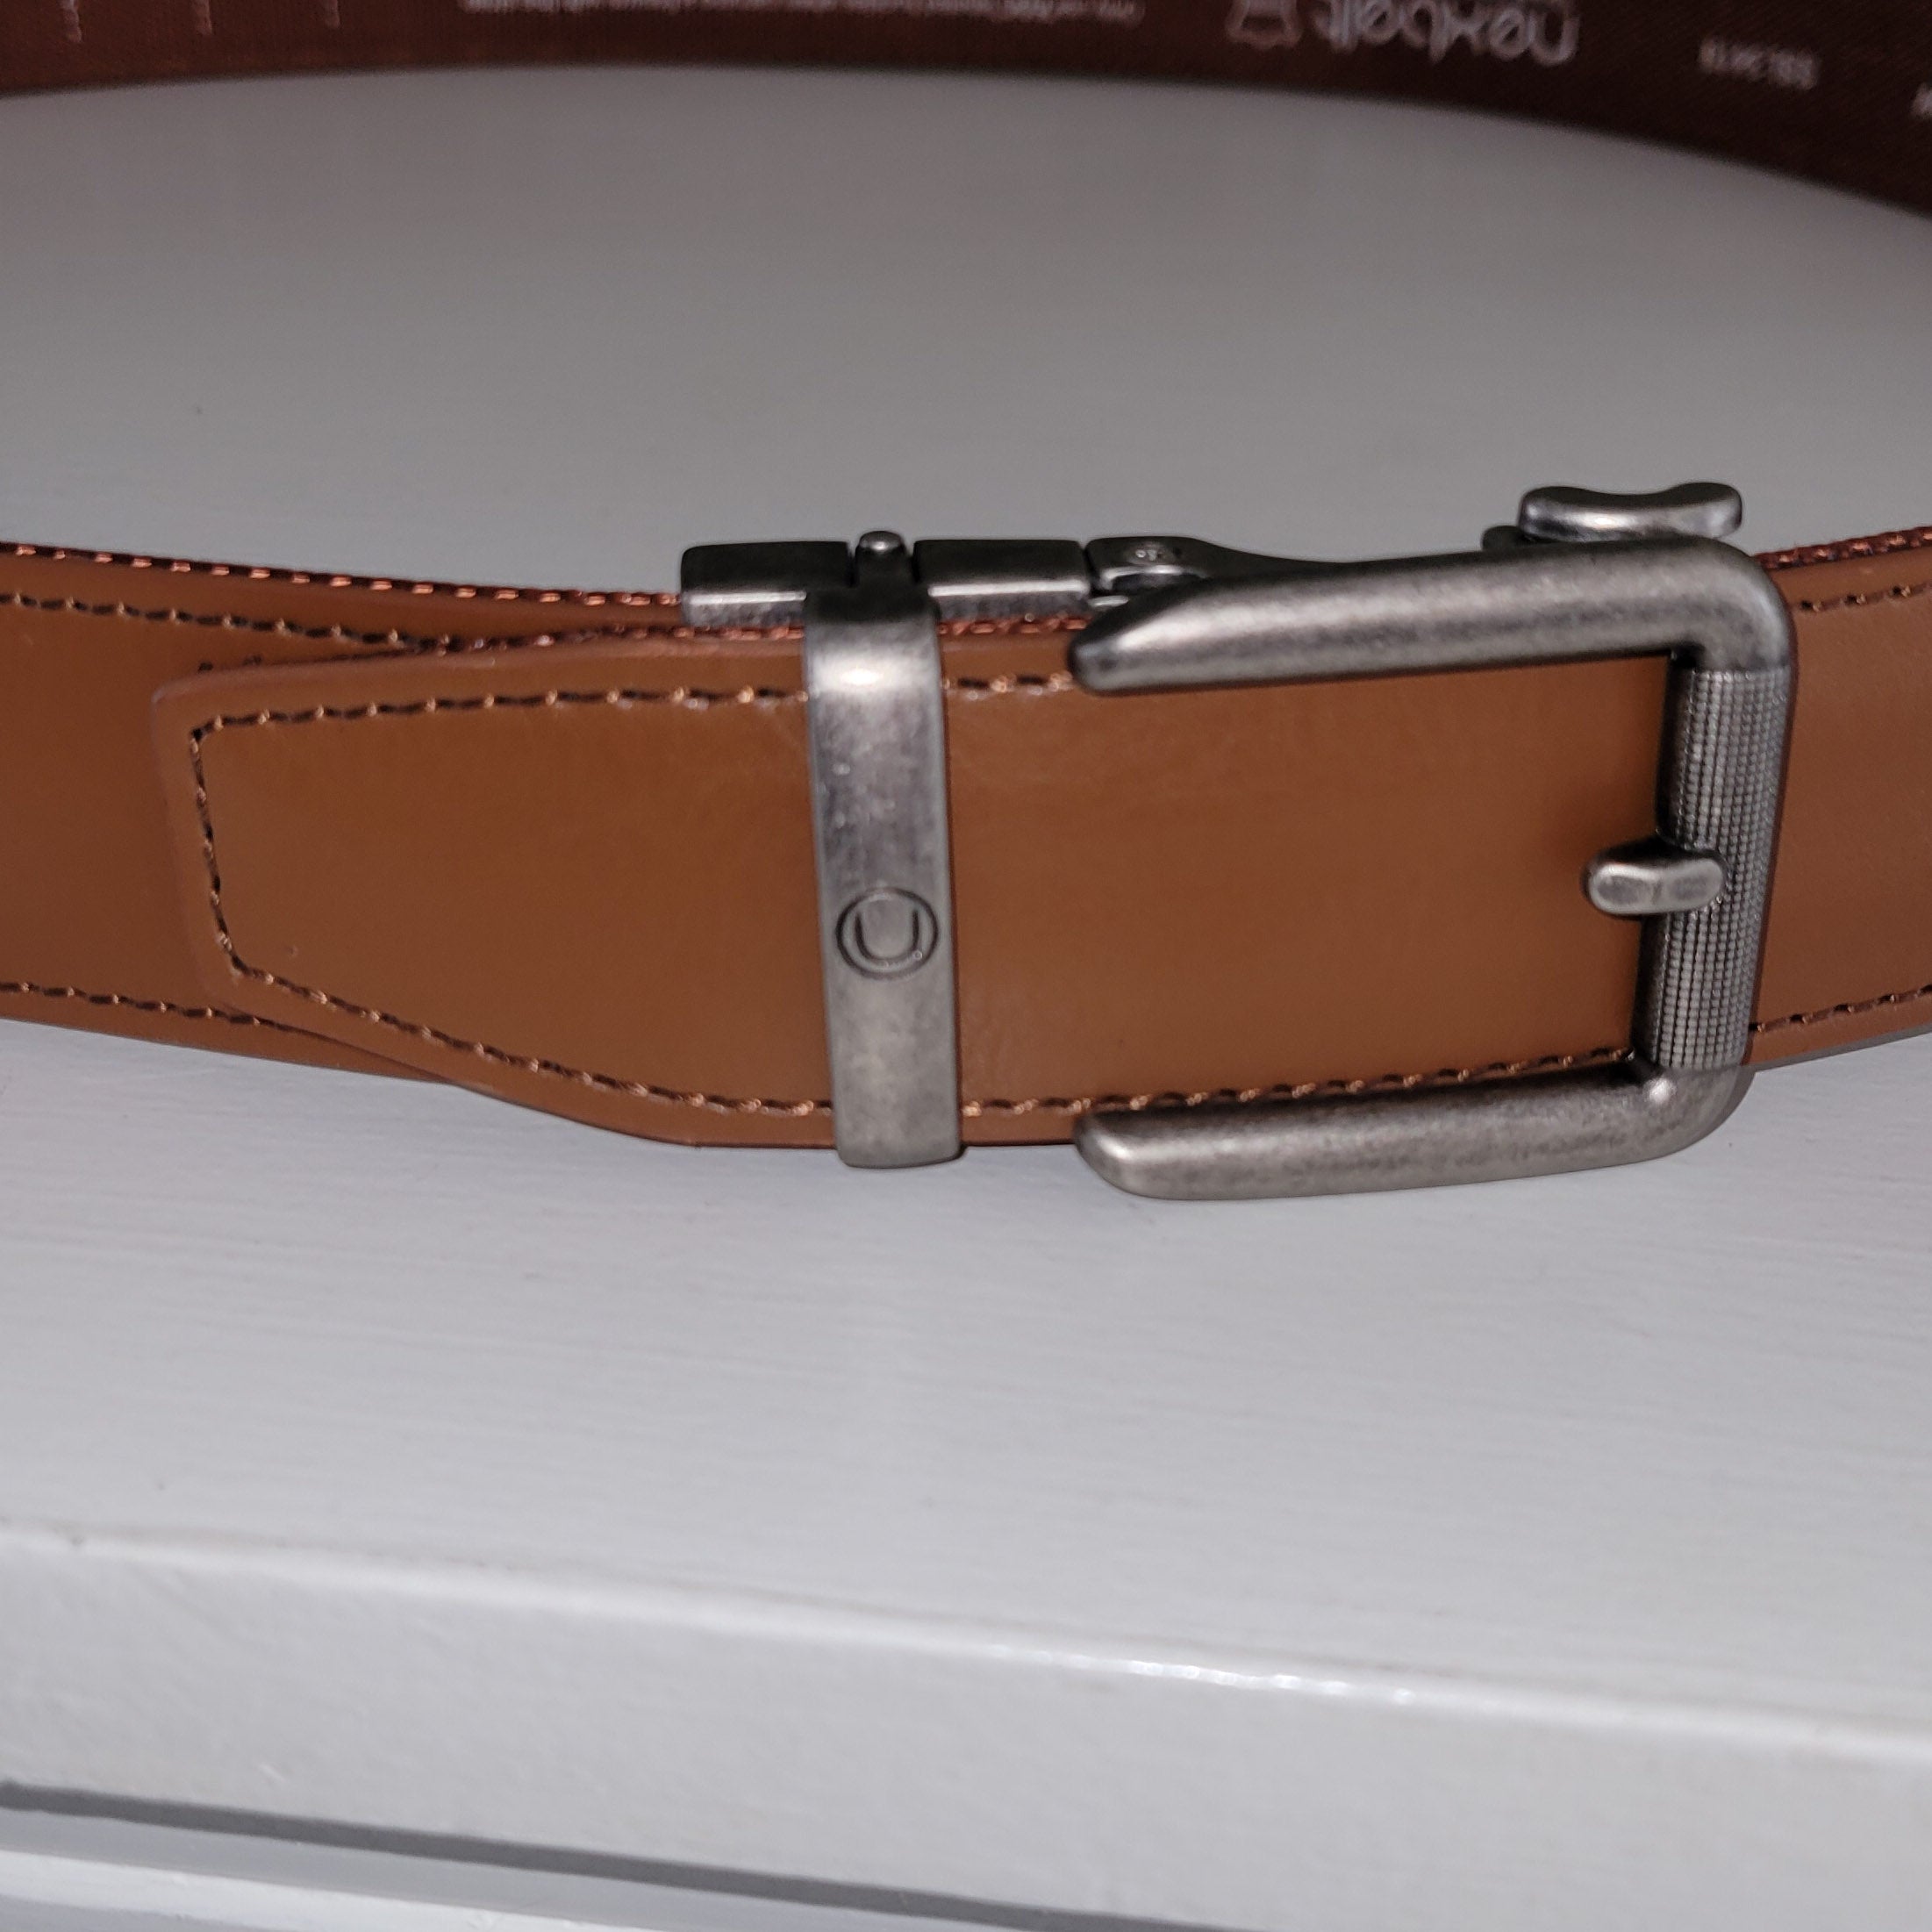 Introducing the Rogue – one of the more versatile belts in our line-up. They have a classic rugged look that go well with every day wear like jeans or chinos. The knurled area of the buckle is nice touch. These ratchet belts looks like a regular belt without the regular belt inconvenience.